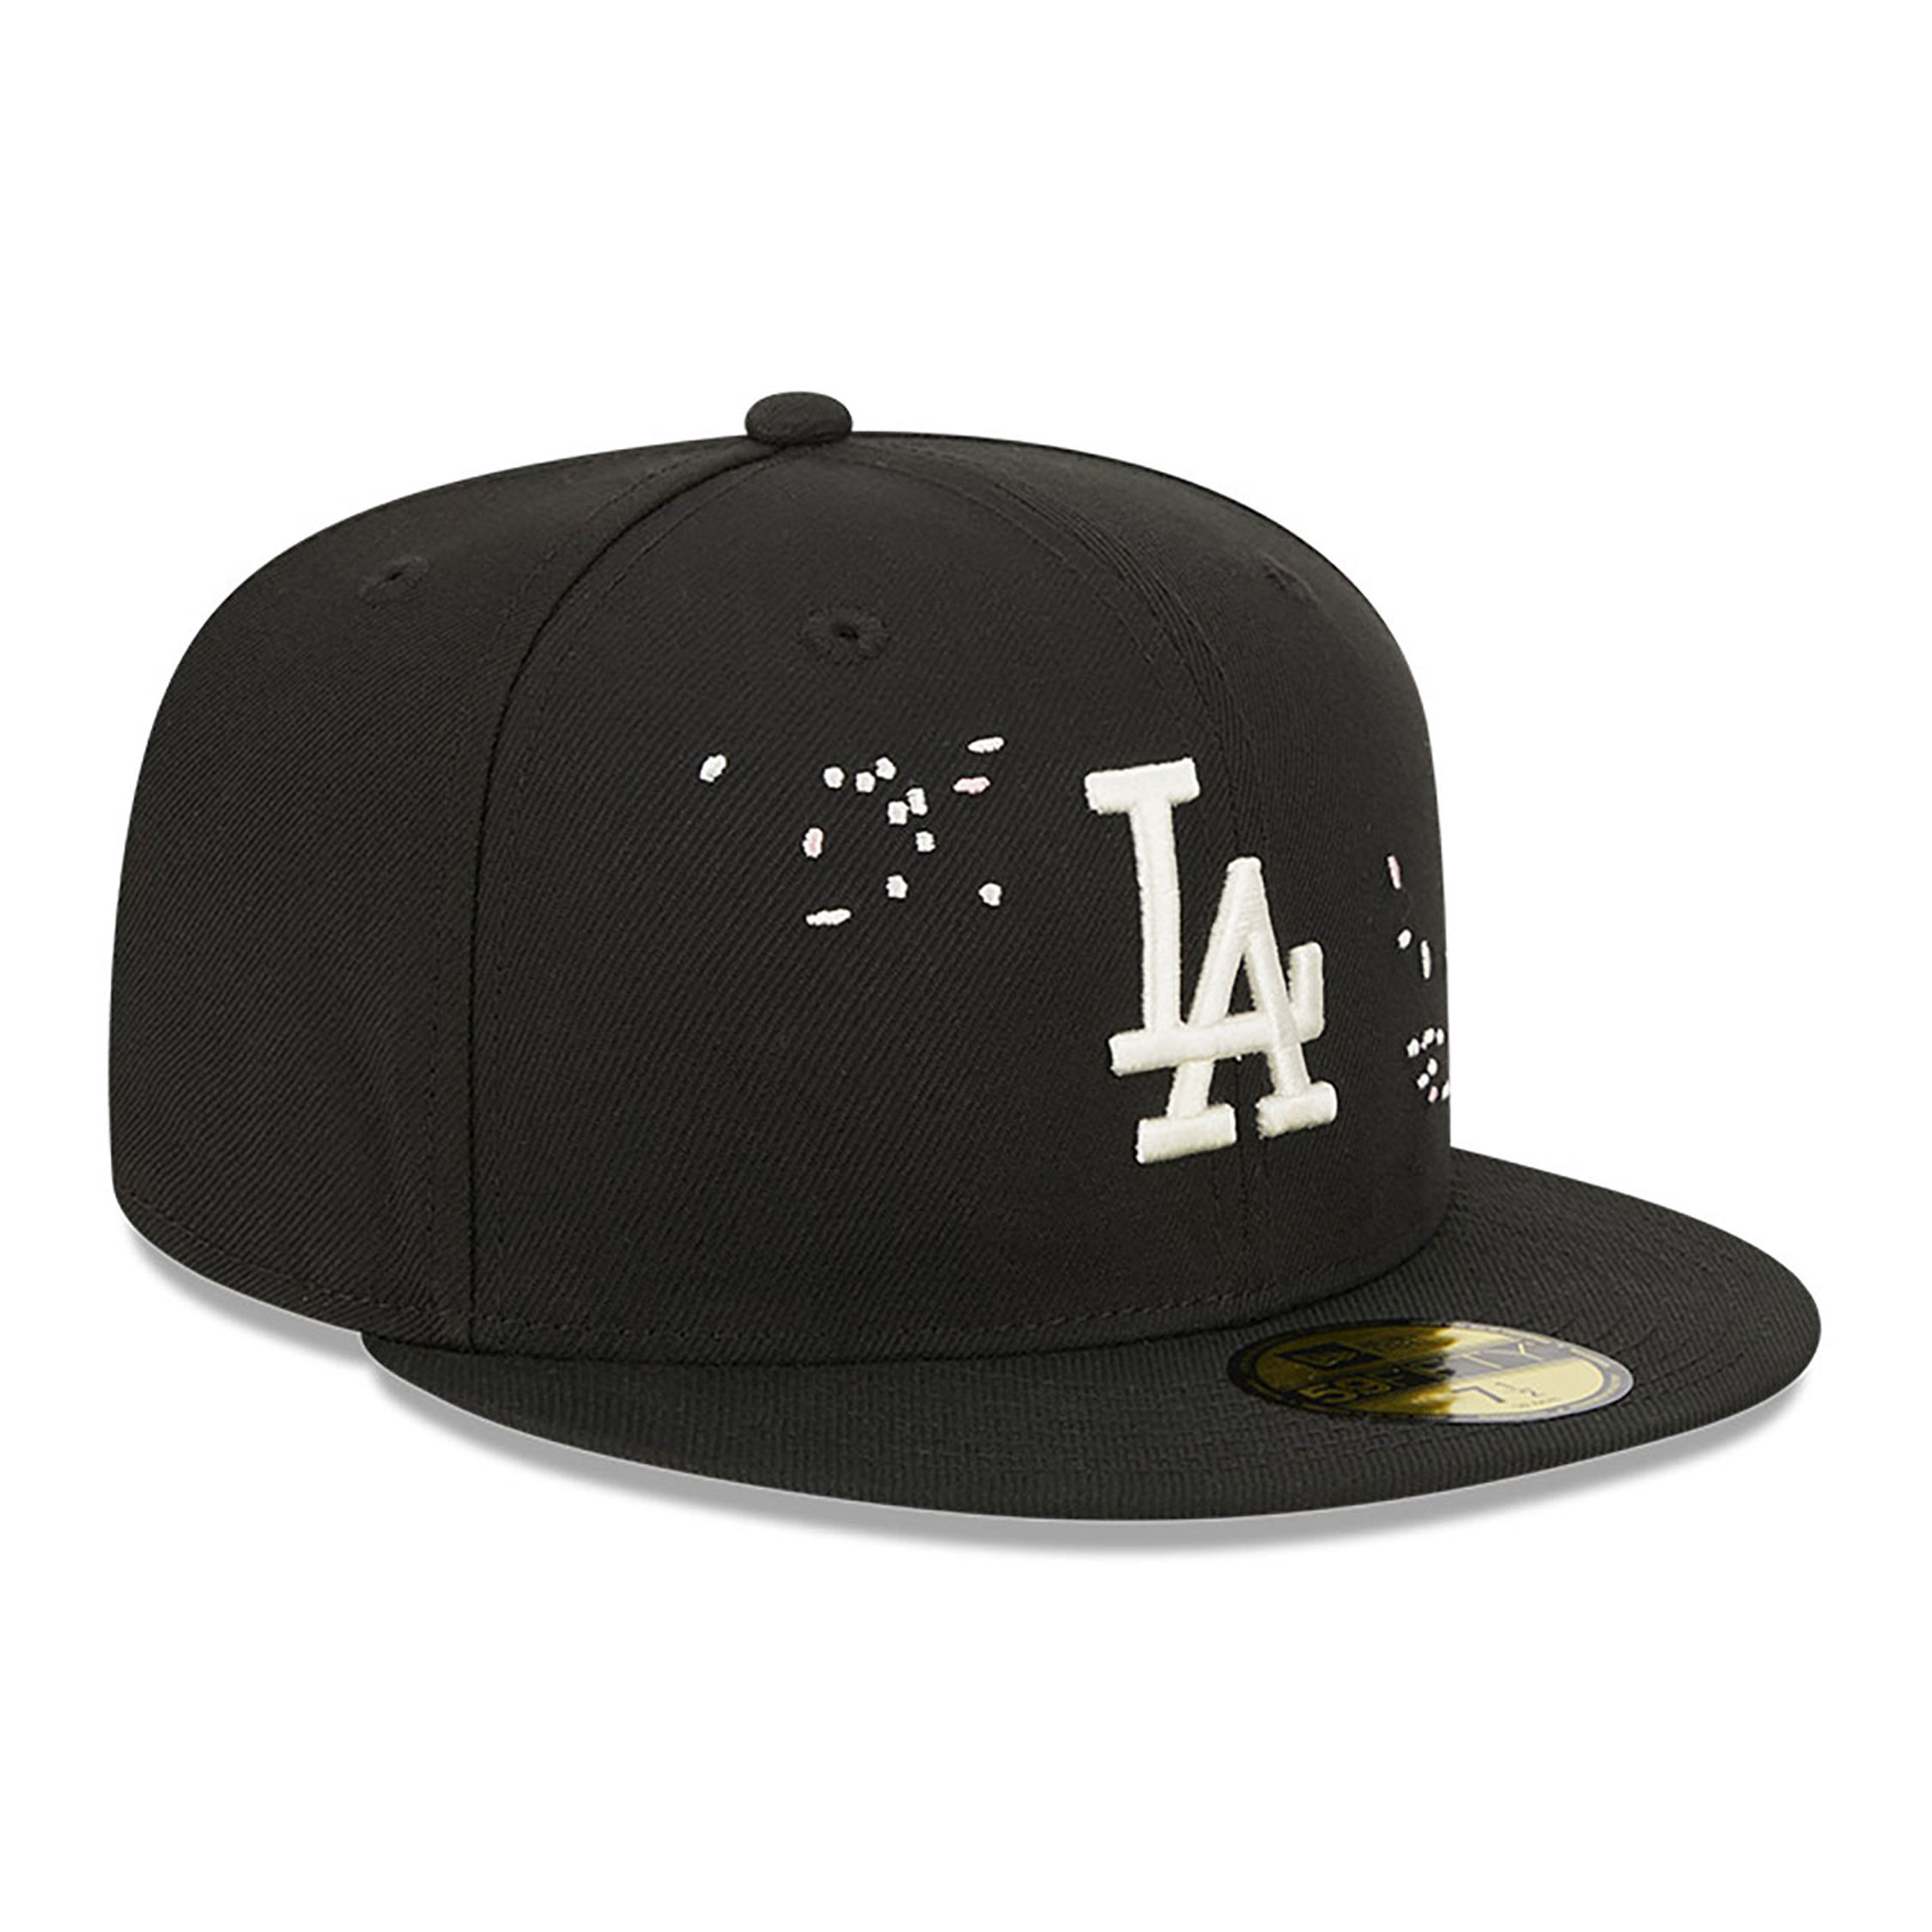 LA Dodgers Cherry Blossom Black 59FIFTY Fitted Cap